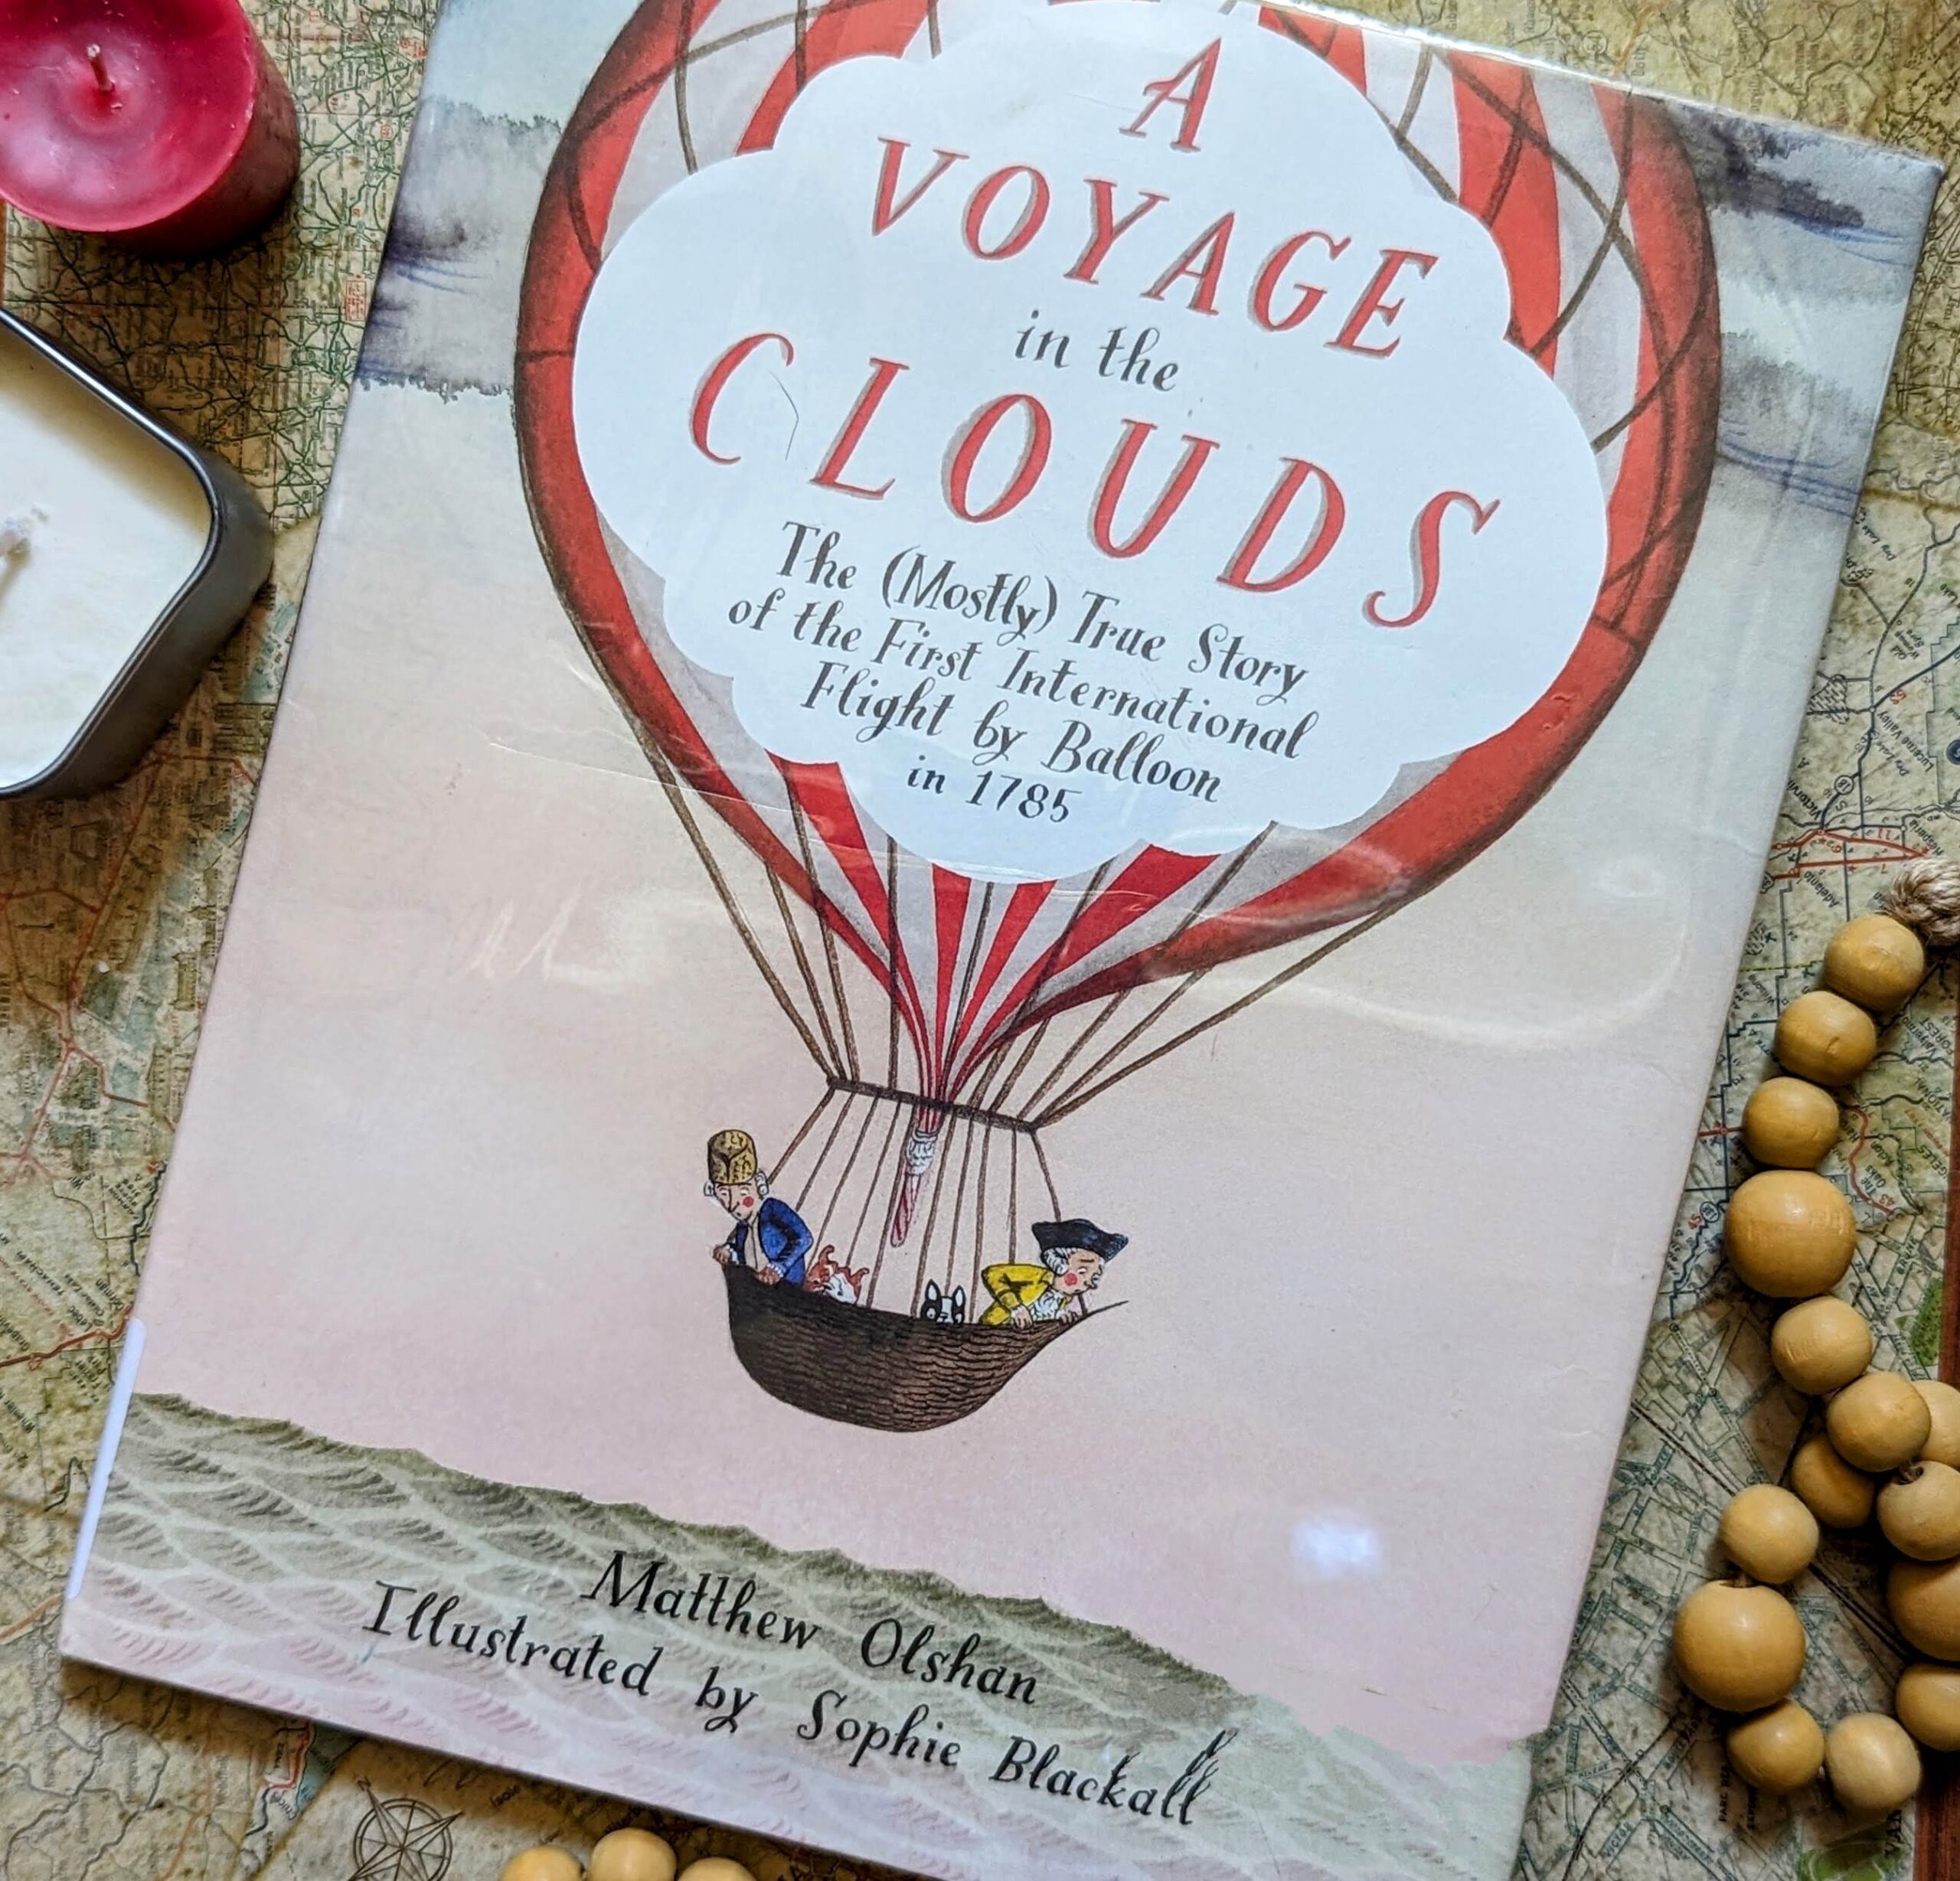 A Voyage in the Clouds by Matthew Olshan